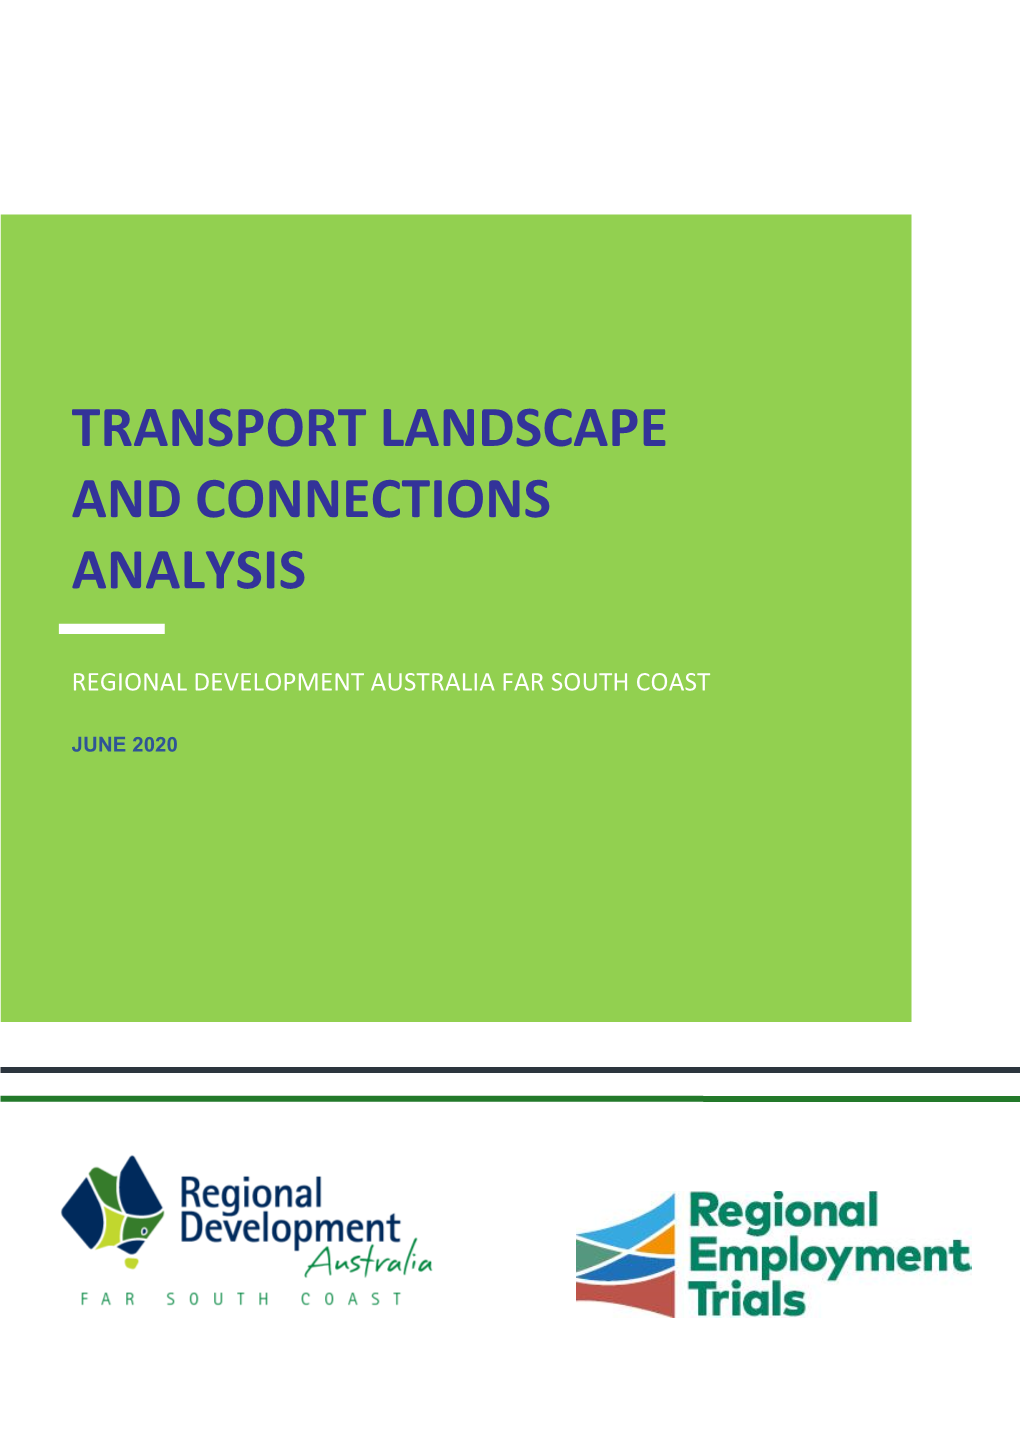 Transport Landscape and Connections Analysis